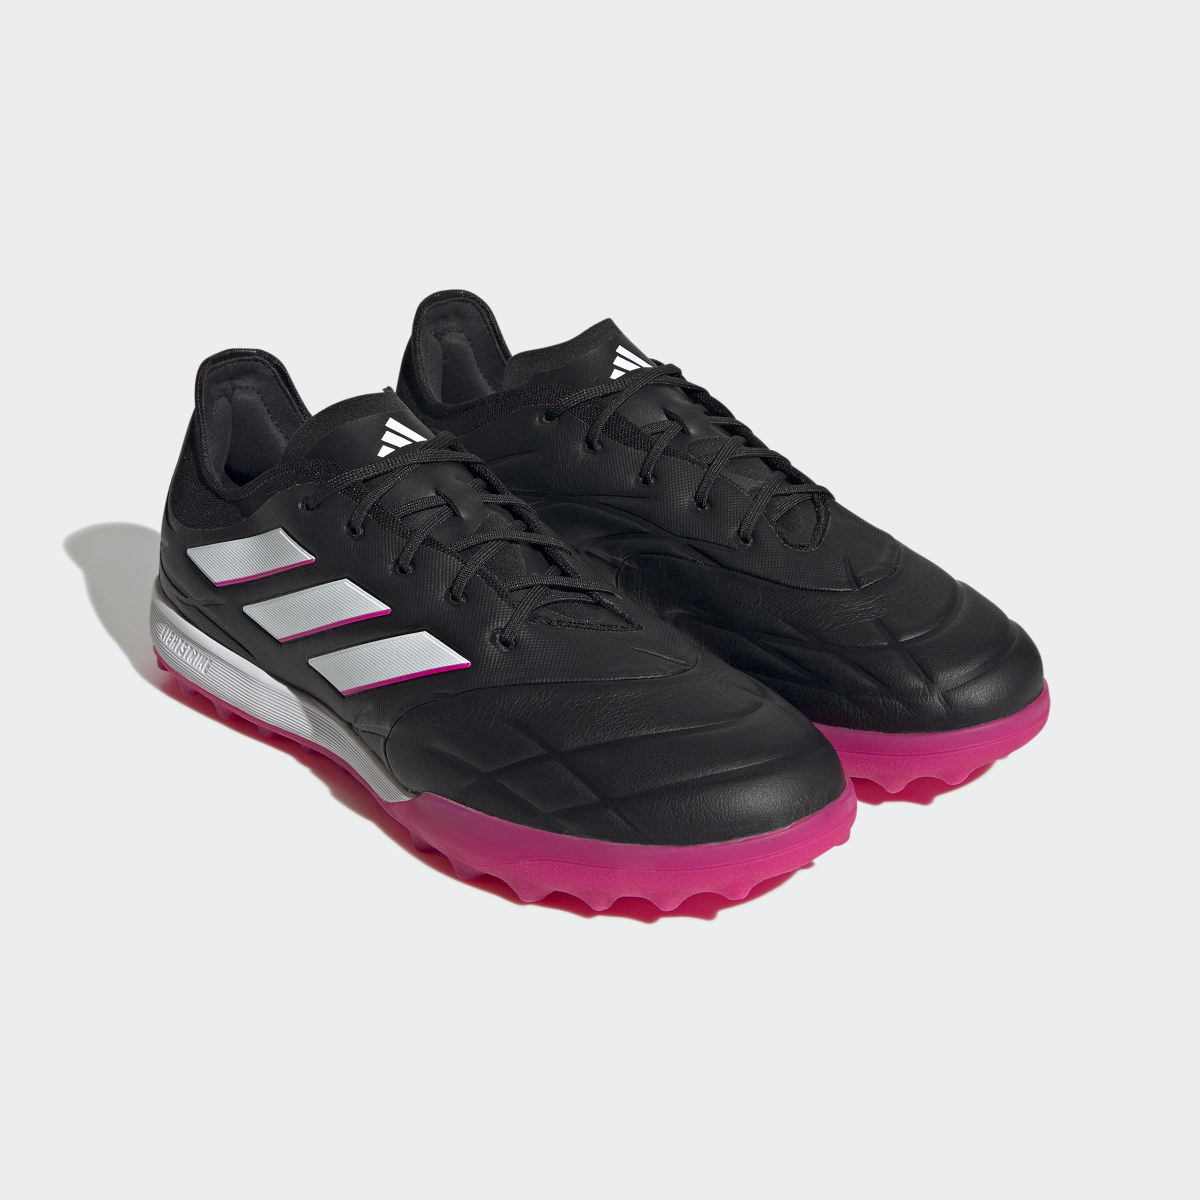 Adidas Copa Pure.1 Turf Boots. 8